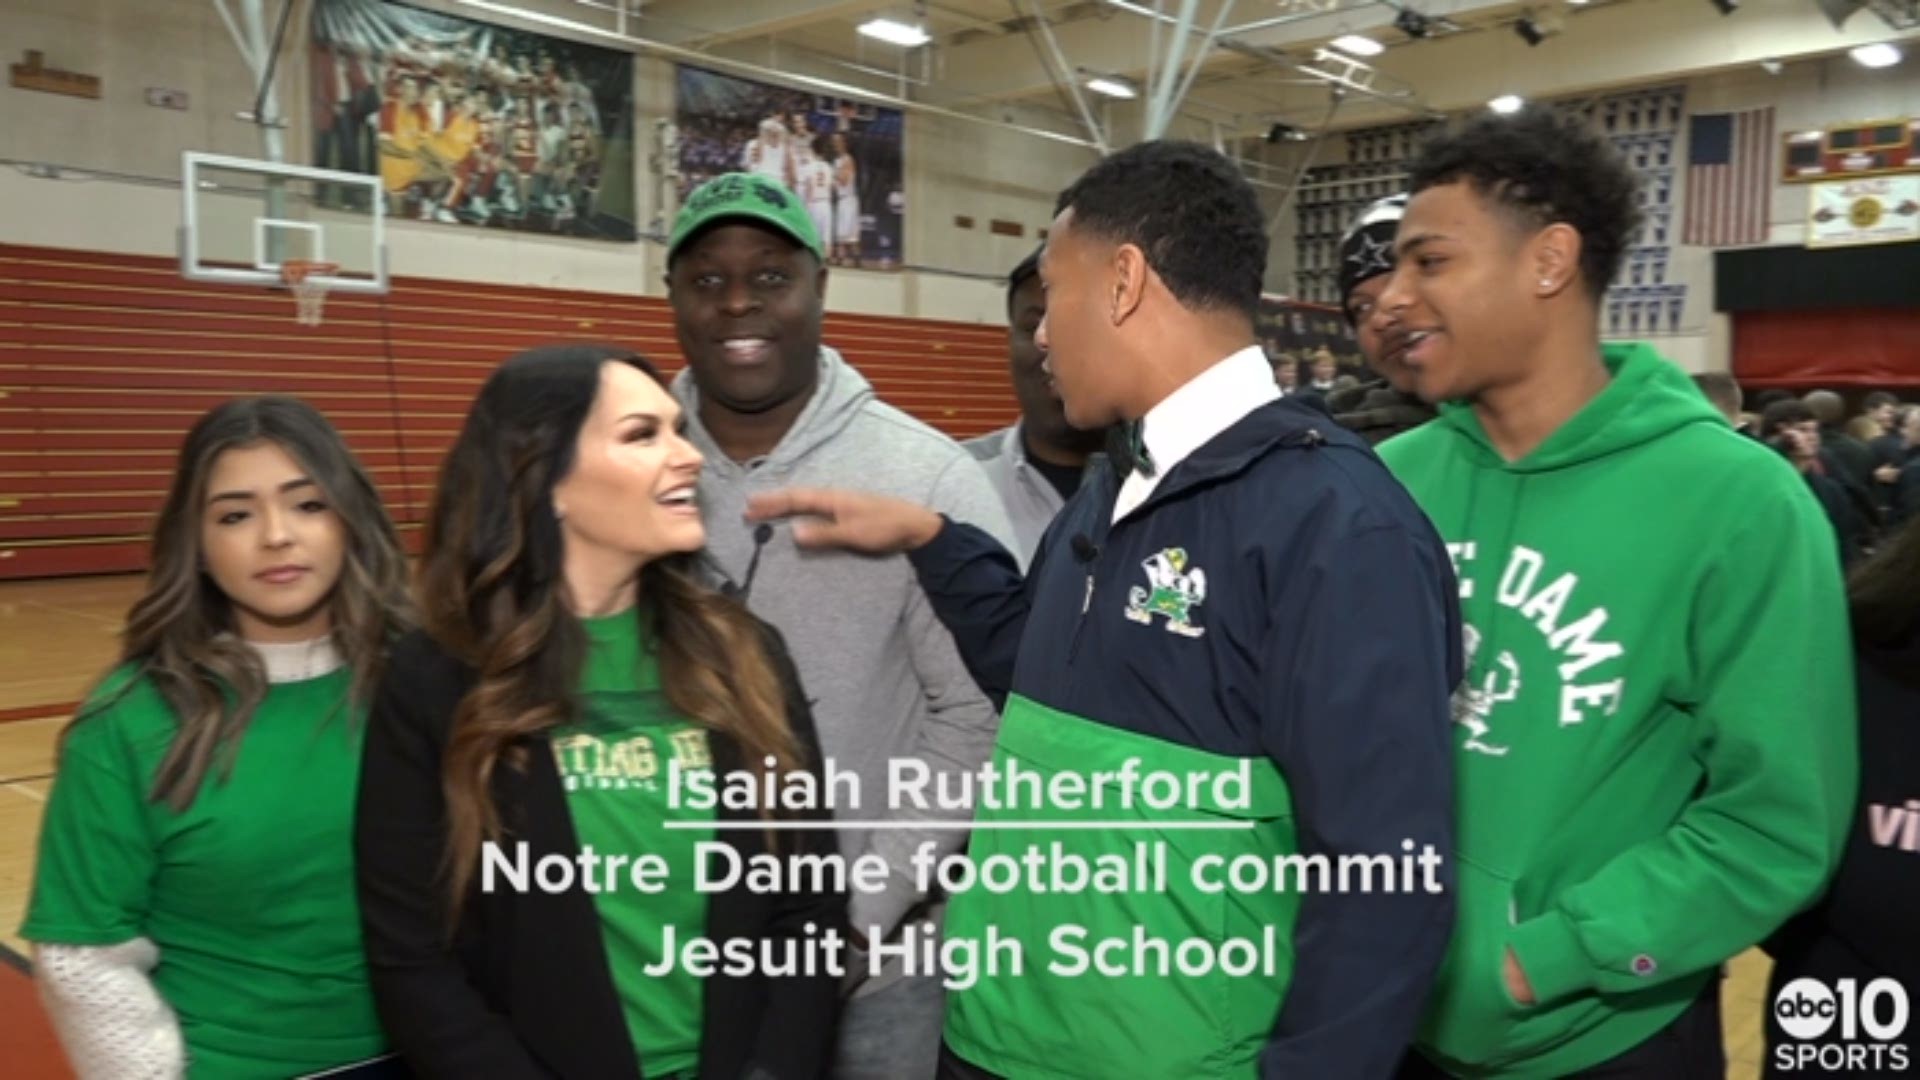 From Sacramento to South Bend: Jesuit's Isaiah Rutherford talks about his future at Notre Dame on National Signing Day